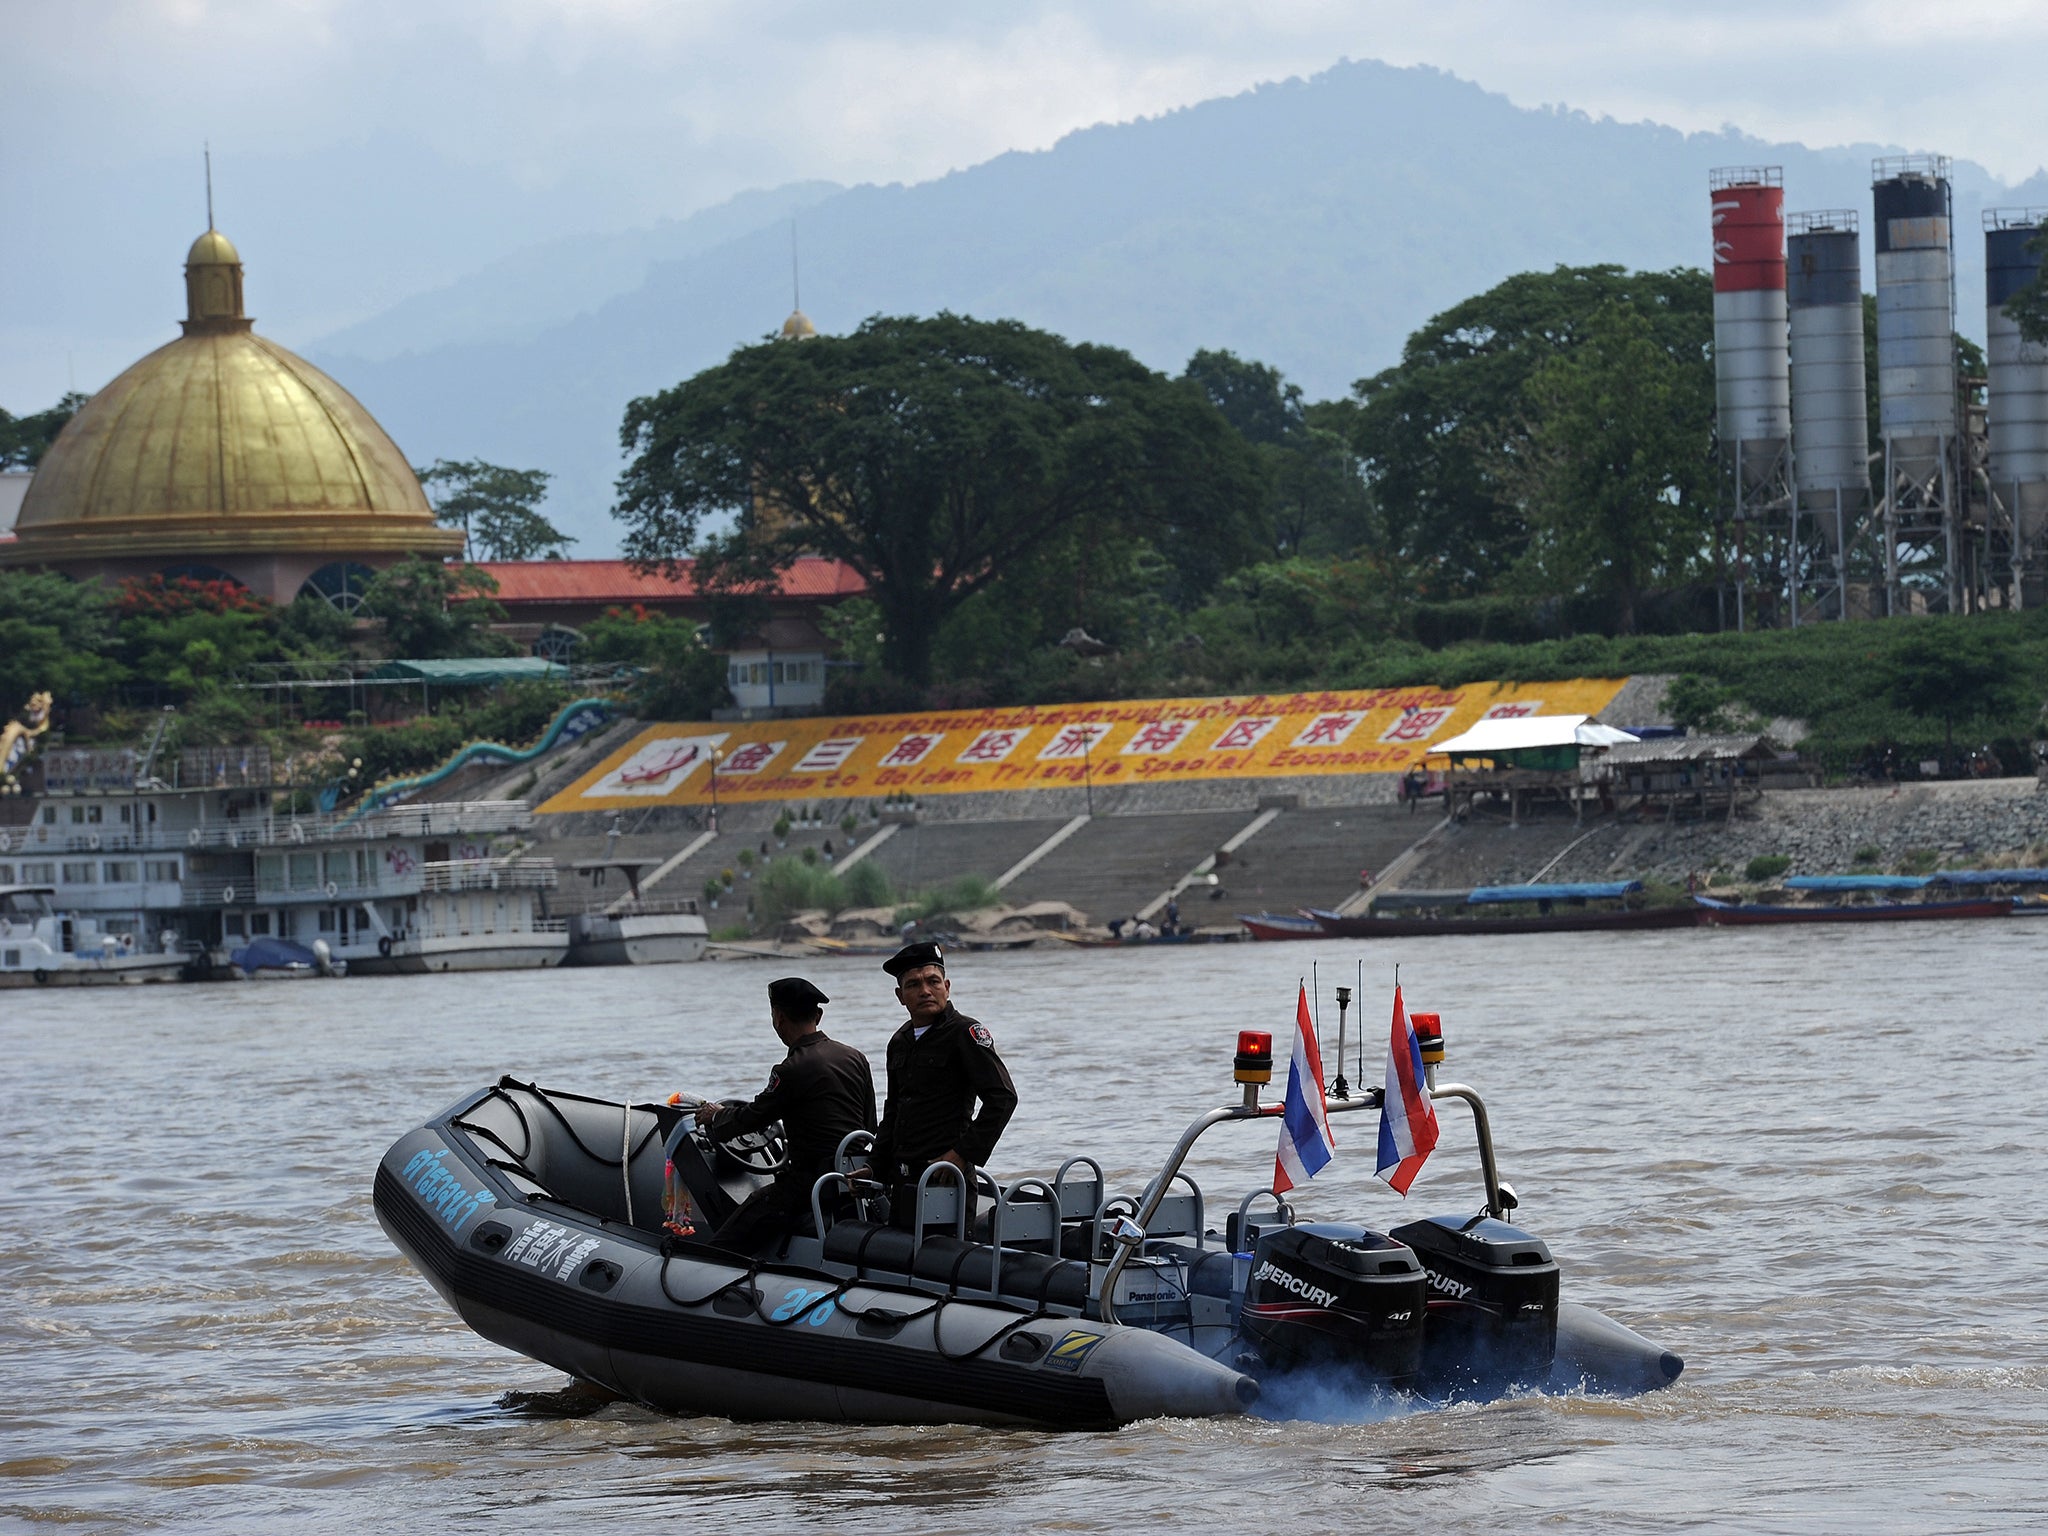 Policemen from the Thai Marine Border Police patrol the Mekong river.